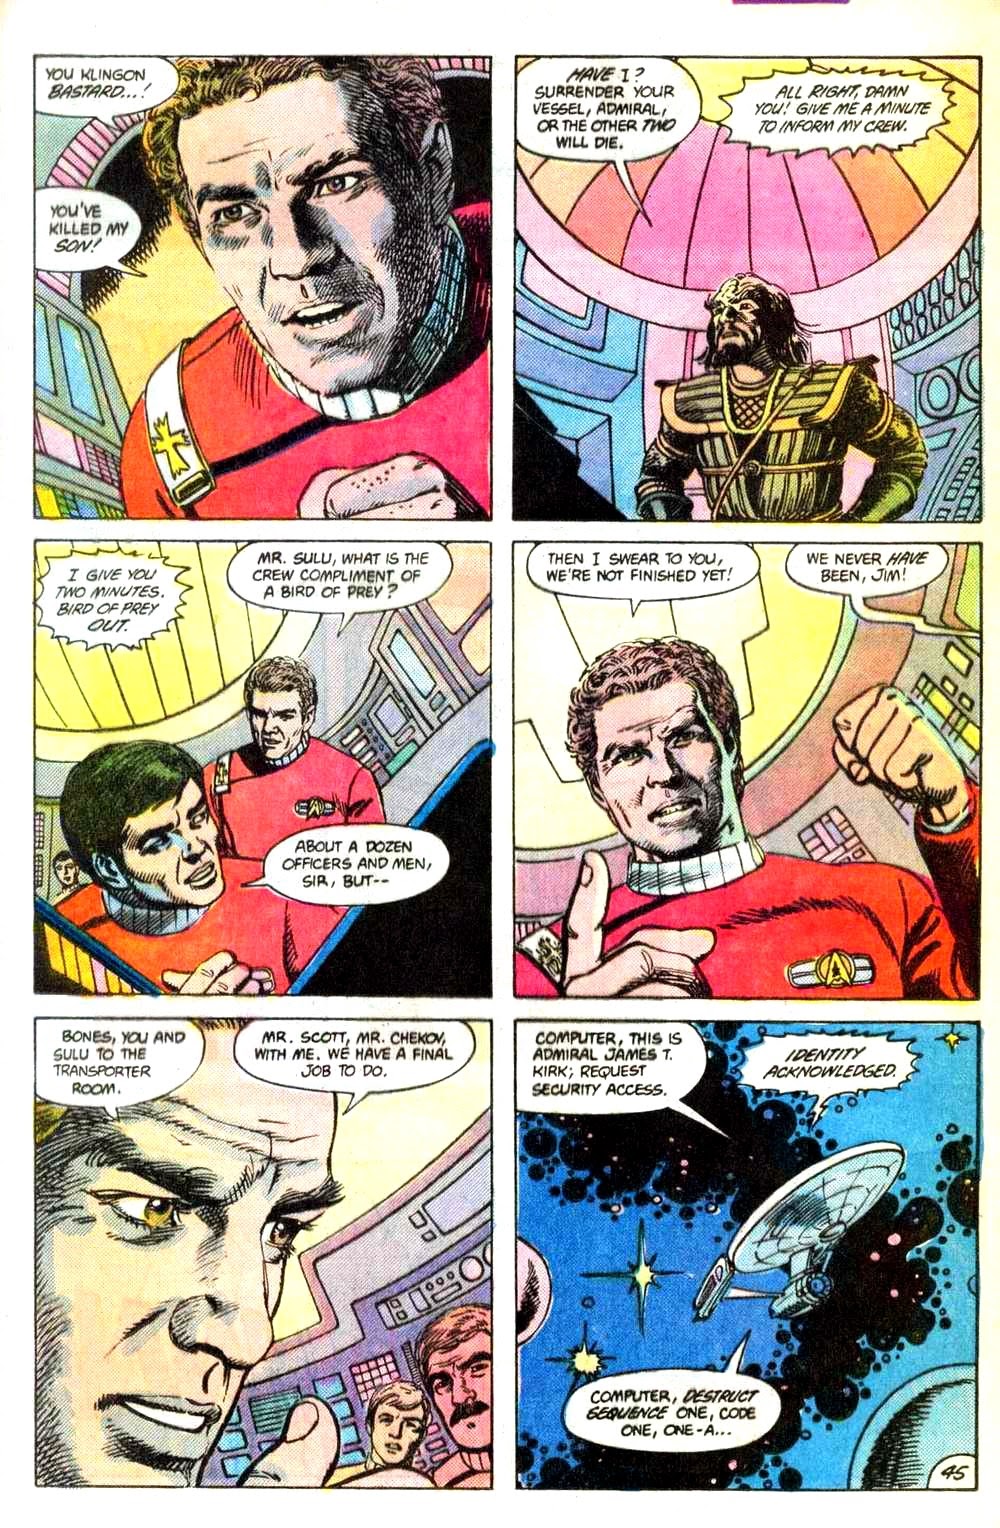 Read online Star Trek III: The Search for Spock comic -  Issue # Full - 47